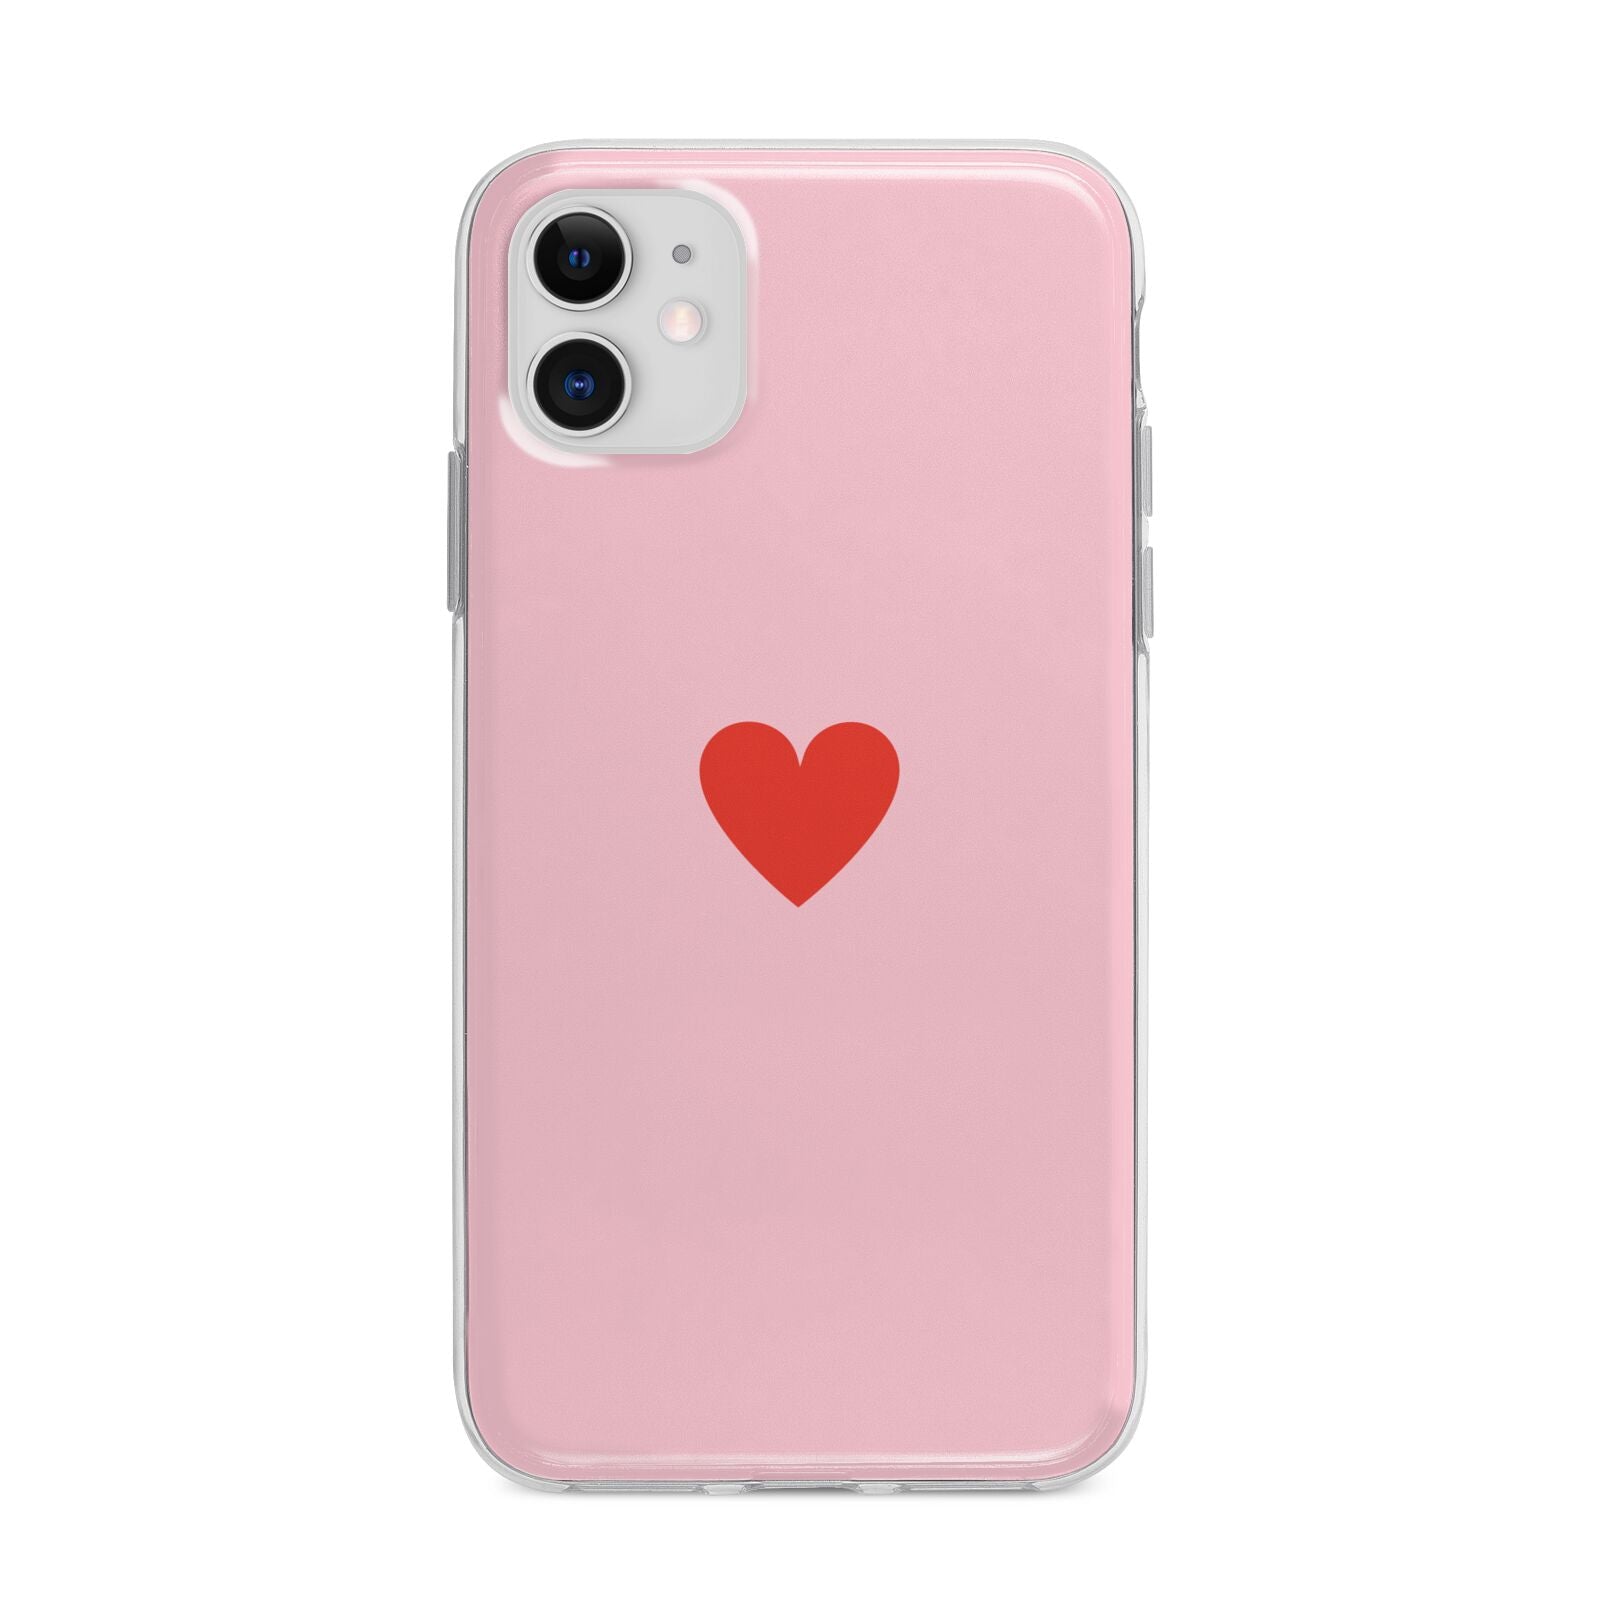 Red Heart Apple iPhone 11 in White with Bumper Case